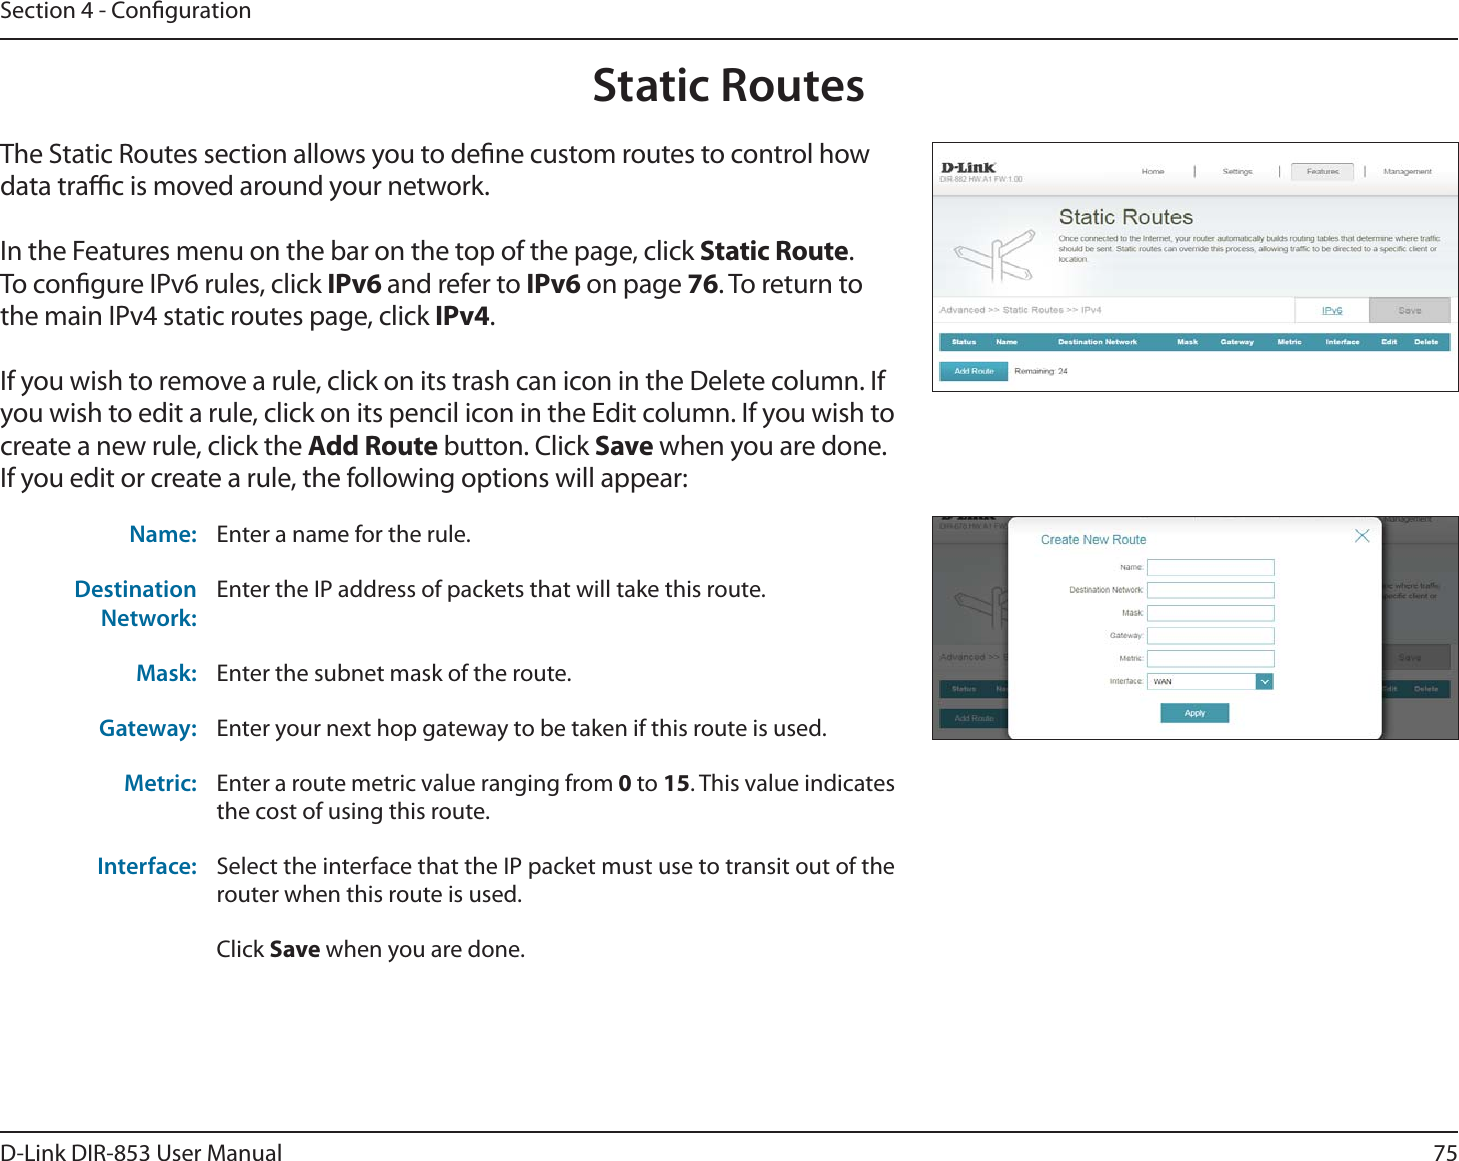 75D-Link DIR-853 User ManualSection 4 - CongurationStatic RoutesThe Static Routes section allows you to dene custom routes to control how data trac is moved around your network.In the Features menu on the bar on the top of the page, click Static Route.To congure IPv6 rules, click IPv6 and refer to IPv6 on page 76. To return to the main IPv4 static routes page, click IPv4.If you wish to remove a rule, click on its trash can icon in the Delete column. If you wish to edit a rule, click on its pencil icon in the Edit column. If you wish to create a new rule, click the Add Route button. Click Save when you are done. If you edit or create a rule, the following options will appear:Name: Enter a name for the rule.Destination Network:Enter the IP address of packets that will take this route.Mask: Enter the subnet mask of the route.Gateway: Enter your next hop gateway to be taken if this route is used.Metric: Enter a route metric value ranging from 0 to 15. This value indicates the cost of using this route. Interface: Select the interface that the IP packet must use to transit out of the router when this route is used. Click Save when you are done.